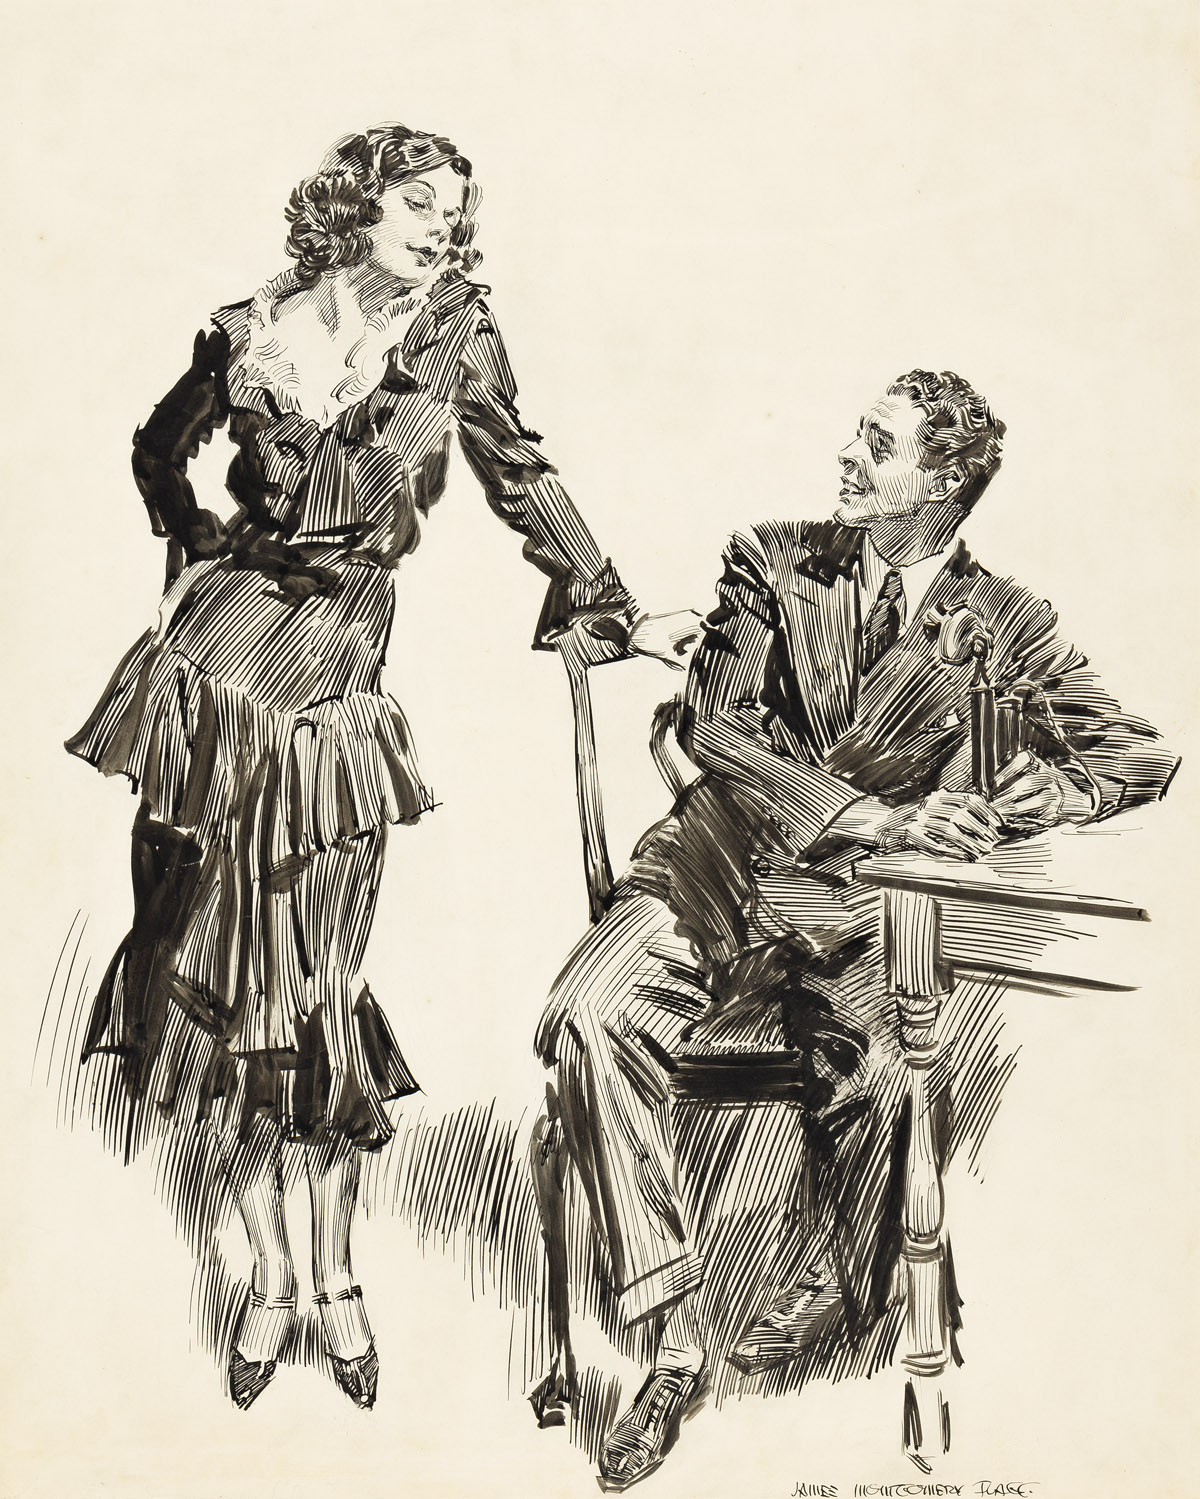 JAMES MONTGOMERY FLAGG (1877-1960) Ive found a woman to sew on buttons, he said politely. Have I? he inquired of Nancy. Big Boy,